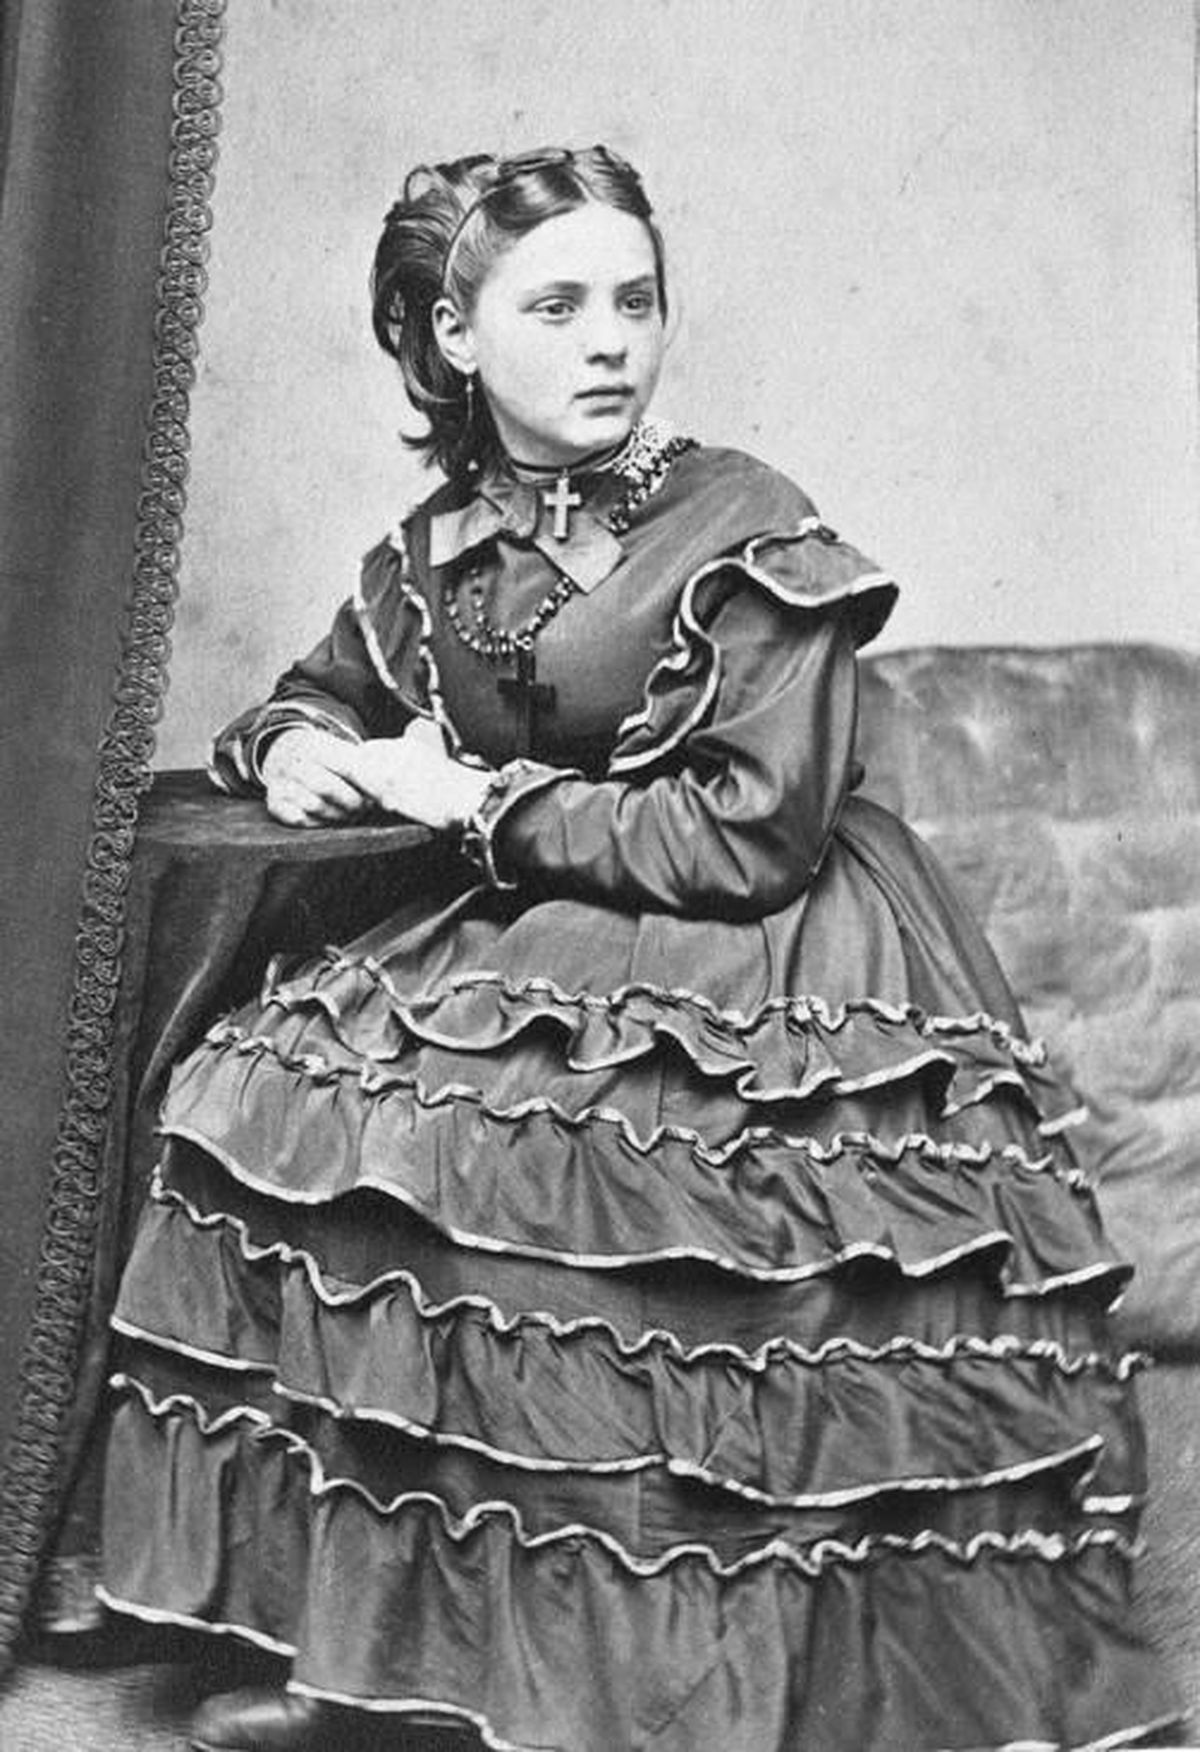 A youthful image of Anna Stratton Browne, the wife of J.J. Browne, one of early Spokane’s foremost promoters. The photographer’s stamp is from Warren, Ohio. (Courtesy Northwest Room, Spokane Public Library)